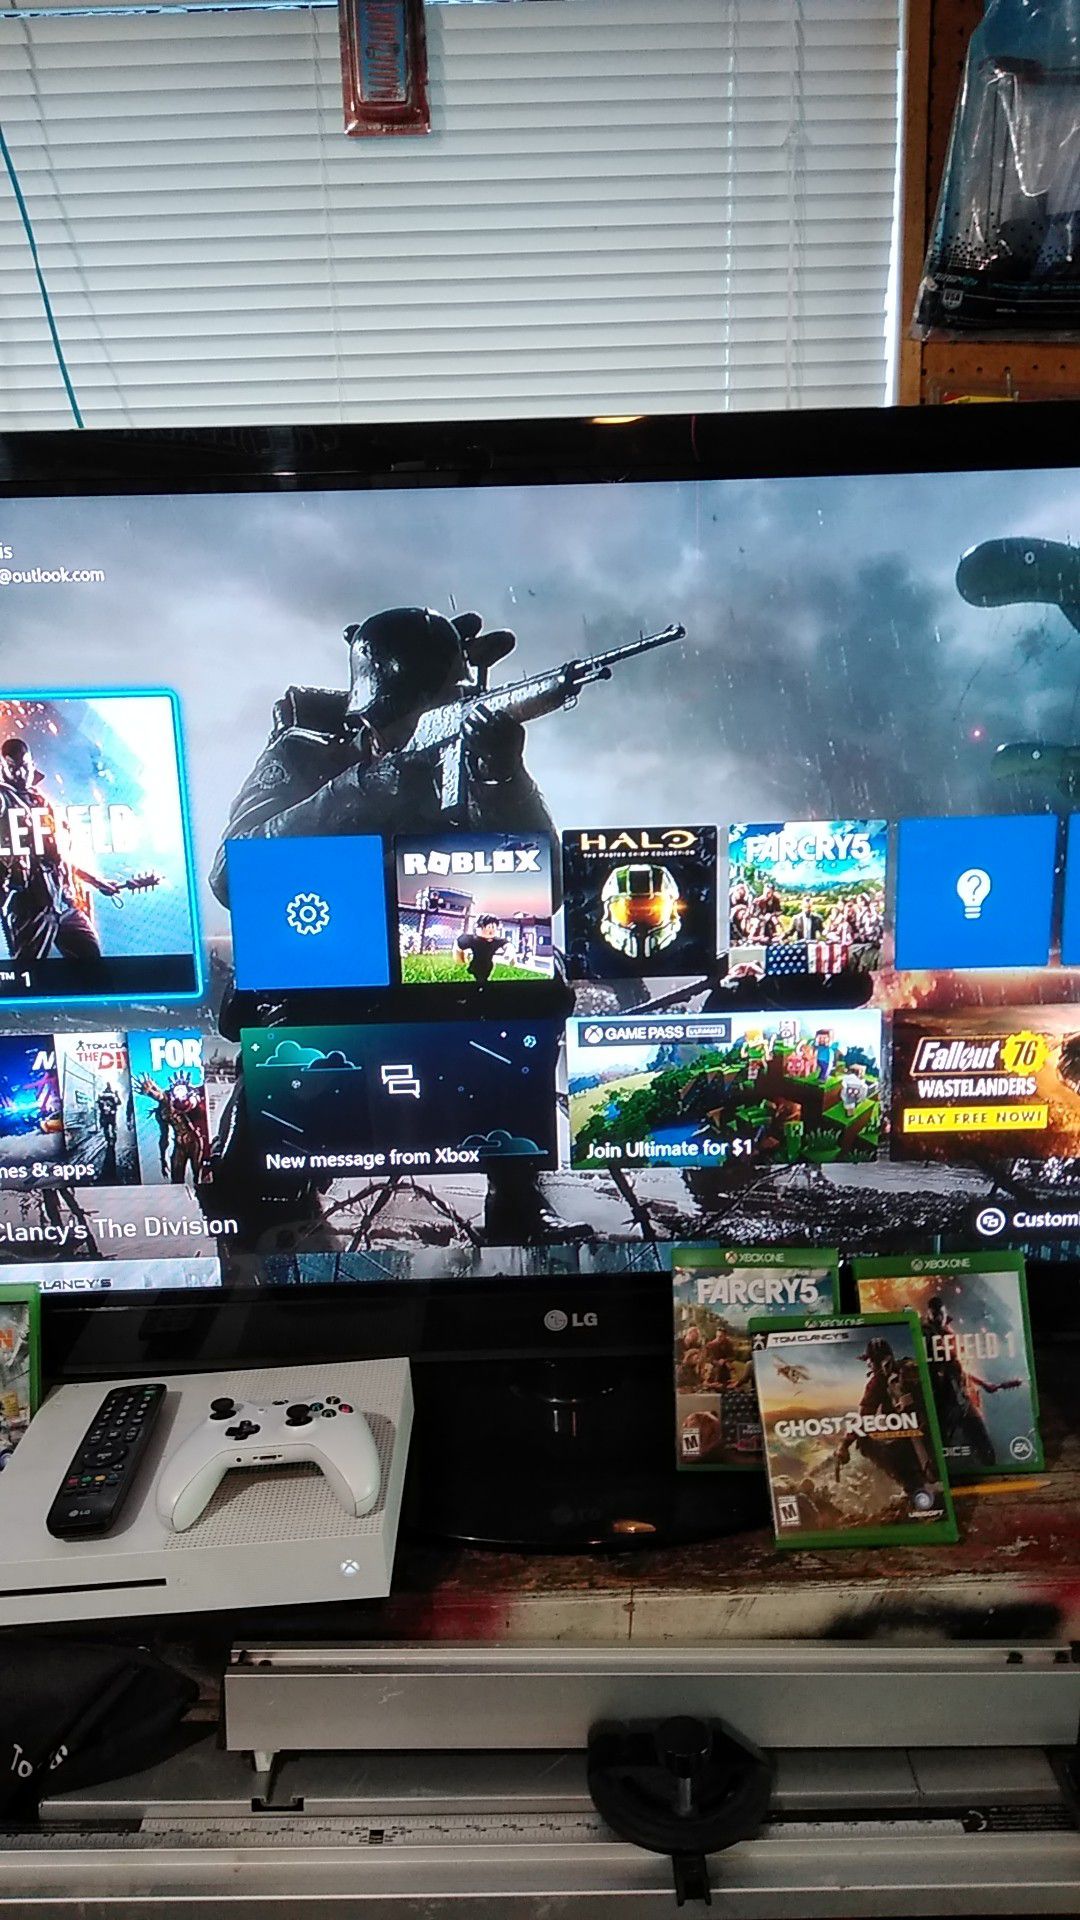 LG 52" TV with Xbox one